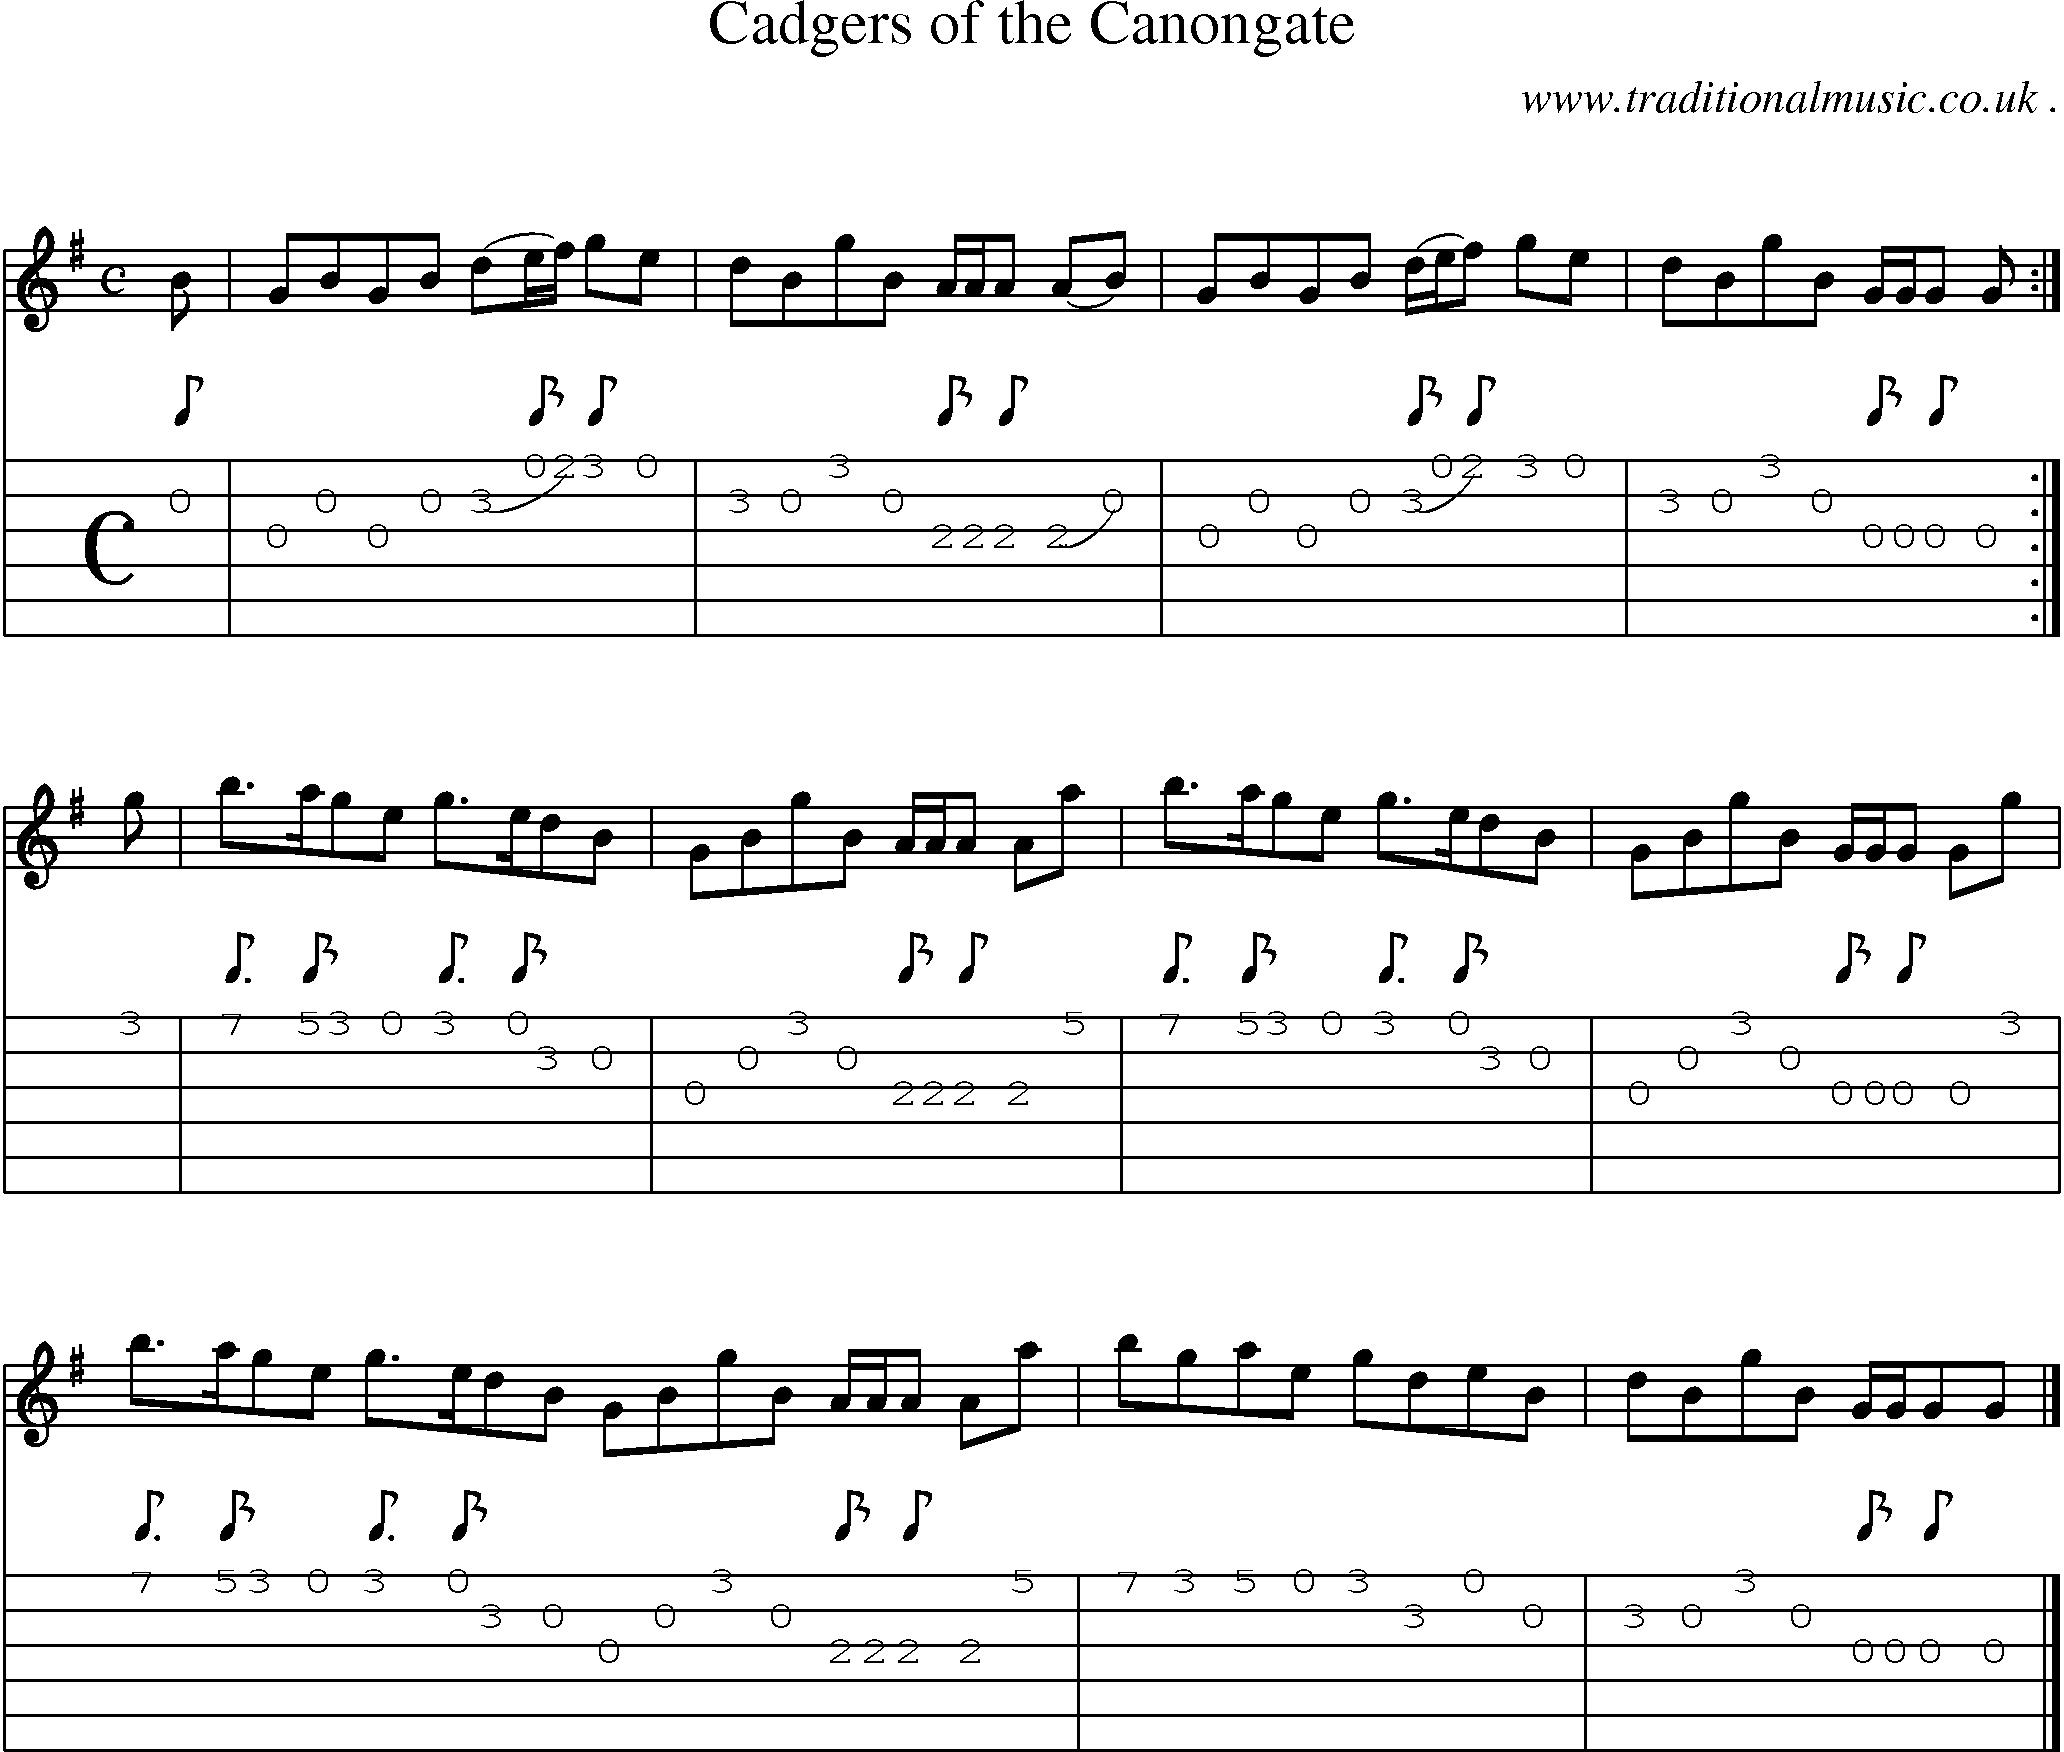 Sheet-music  score, Chords and Guitar Tabs for Cadgers Of The Canongate